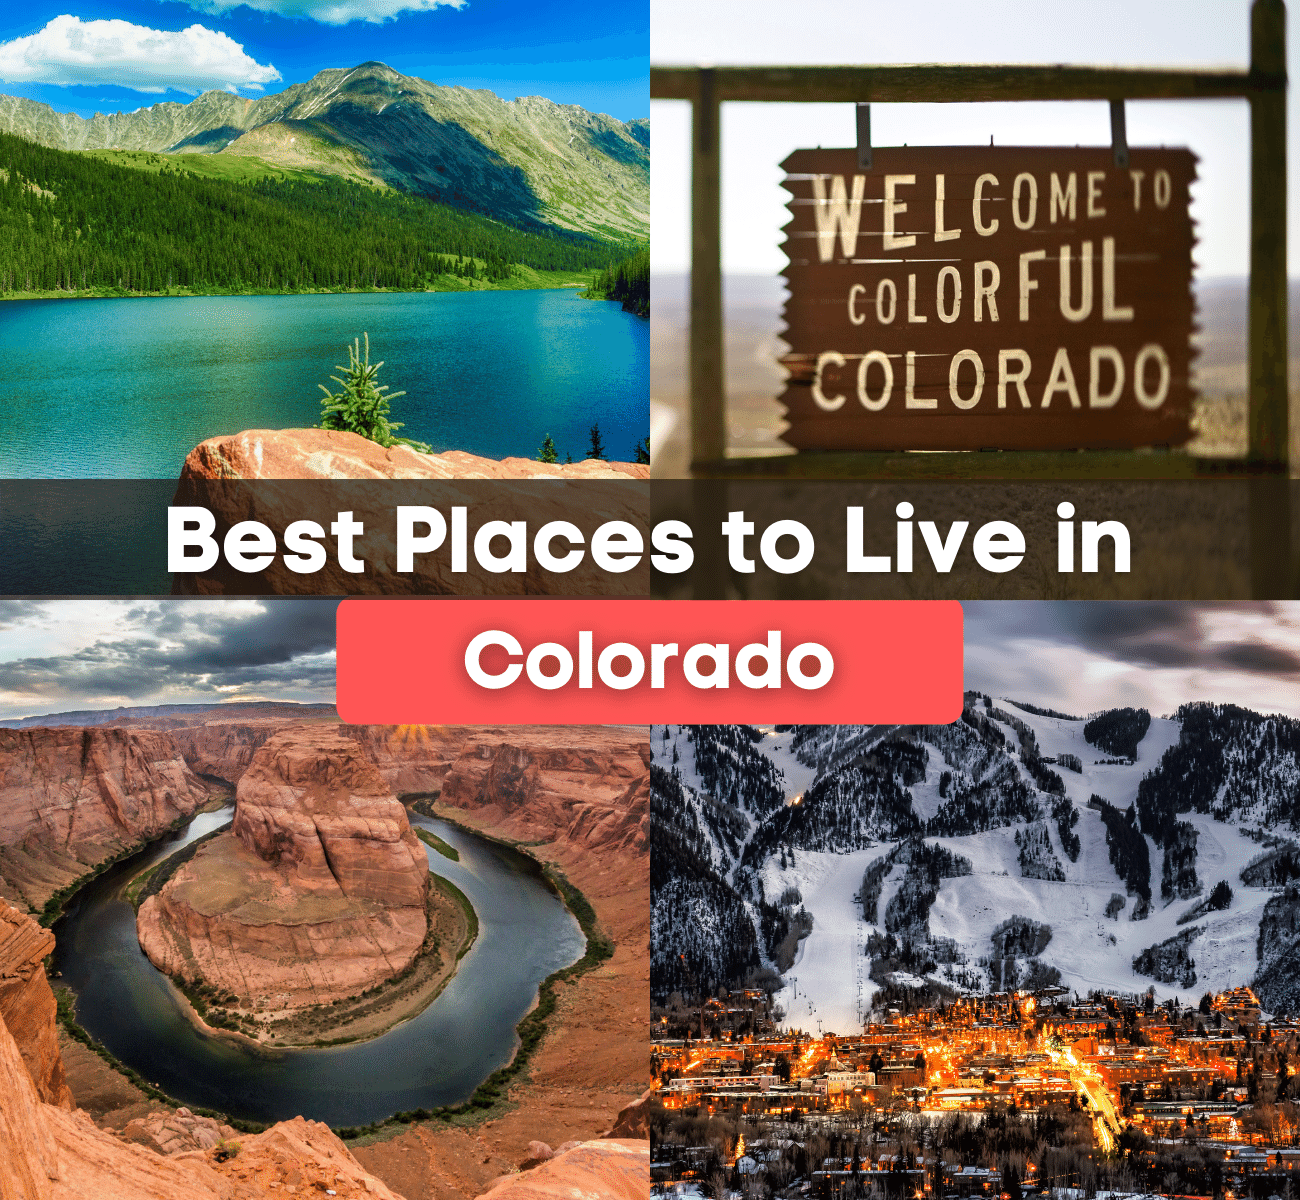 What are the best places to live in Colorado? Here are the best cities to live in Colorado